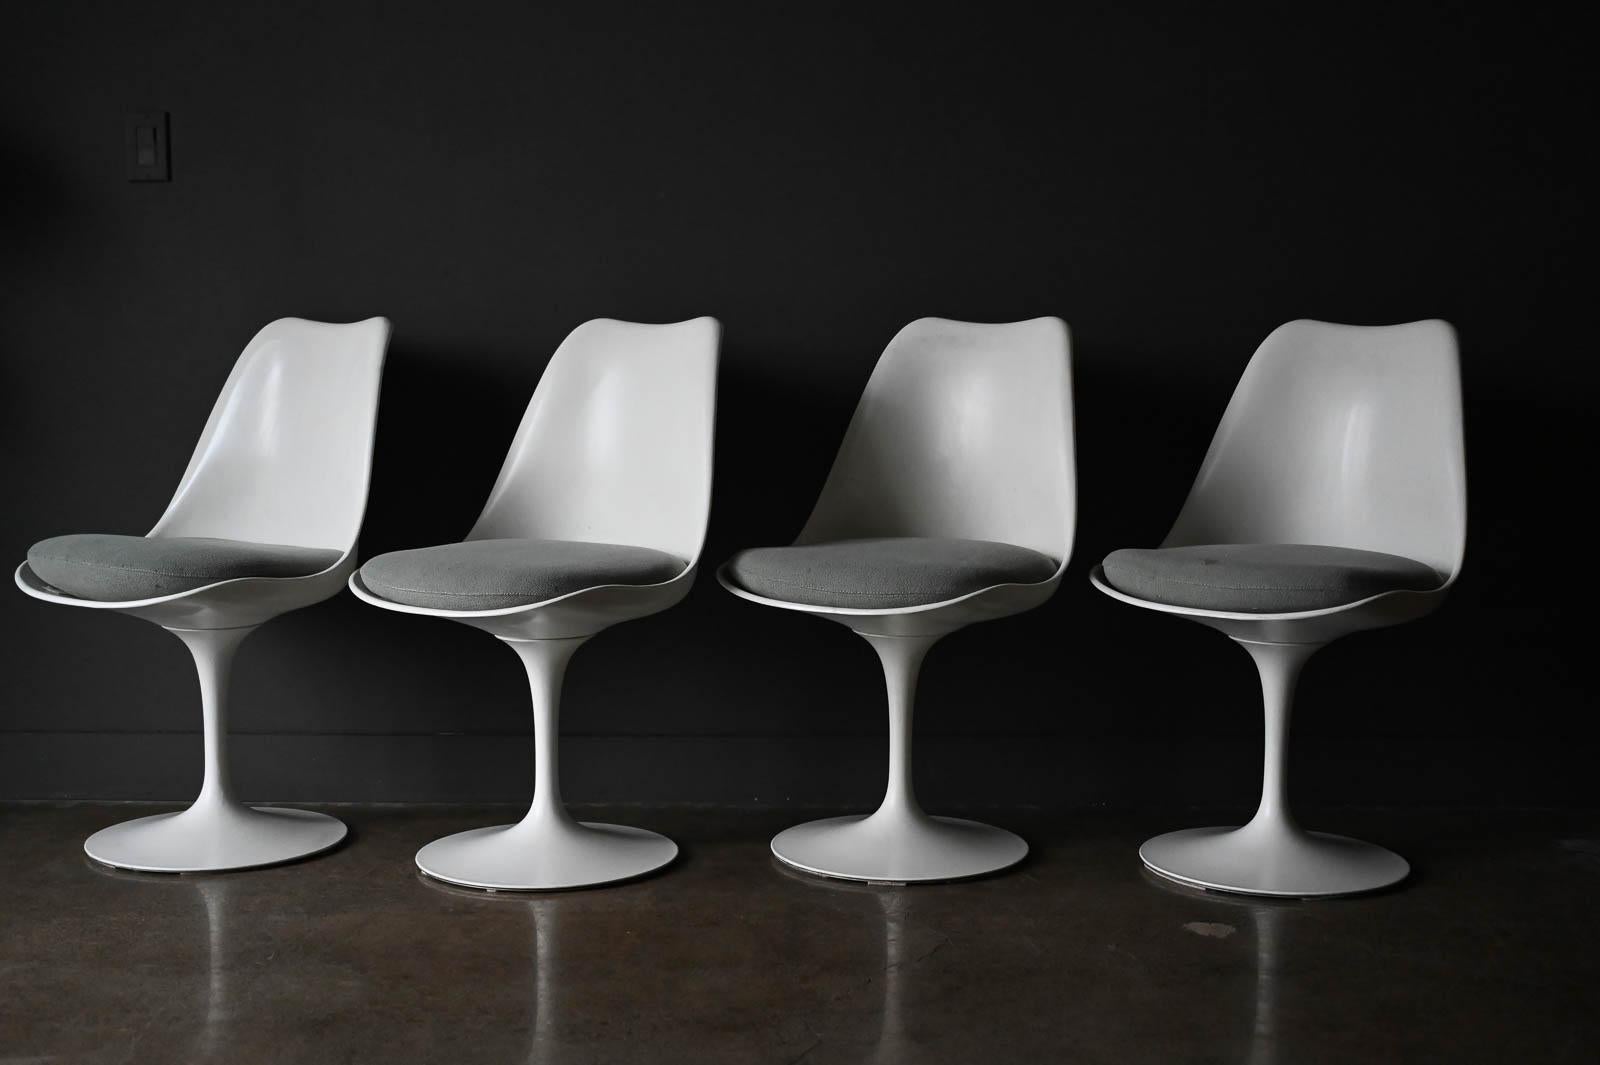 Set of 4 Eero Saarinen for Knoll Tulip Chairs, circa 1959. Set of 4 original armless tulip dining chairs with early Knoll Bowtie label dating to the late 1950s, early 1960s. These chairs are in very good vintage condition and have authentic seat